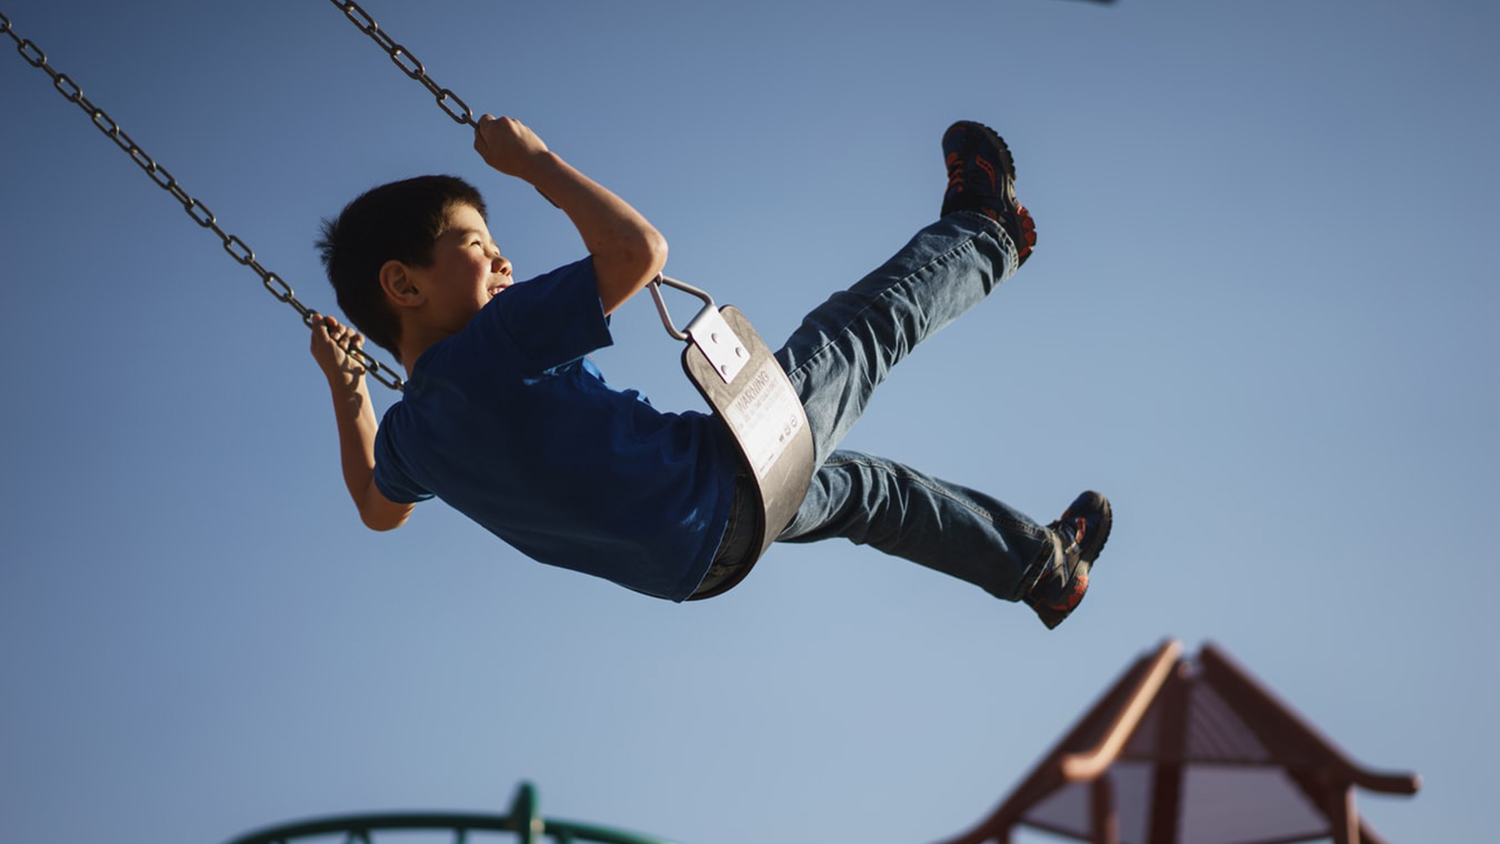 a child enjoys swinging on the swing set of a playground